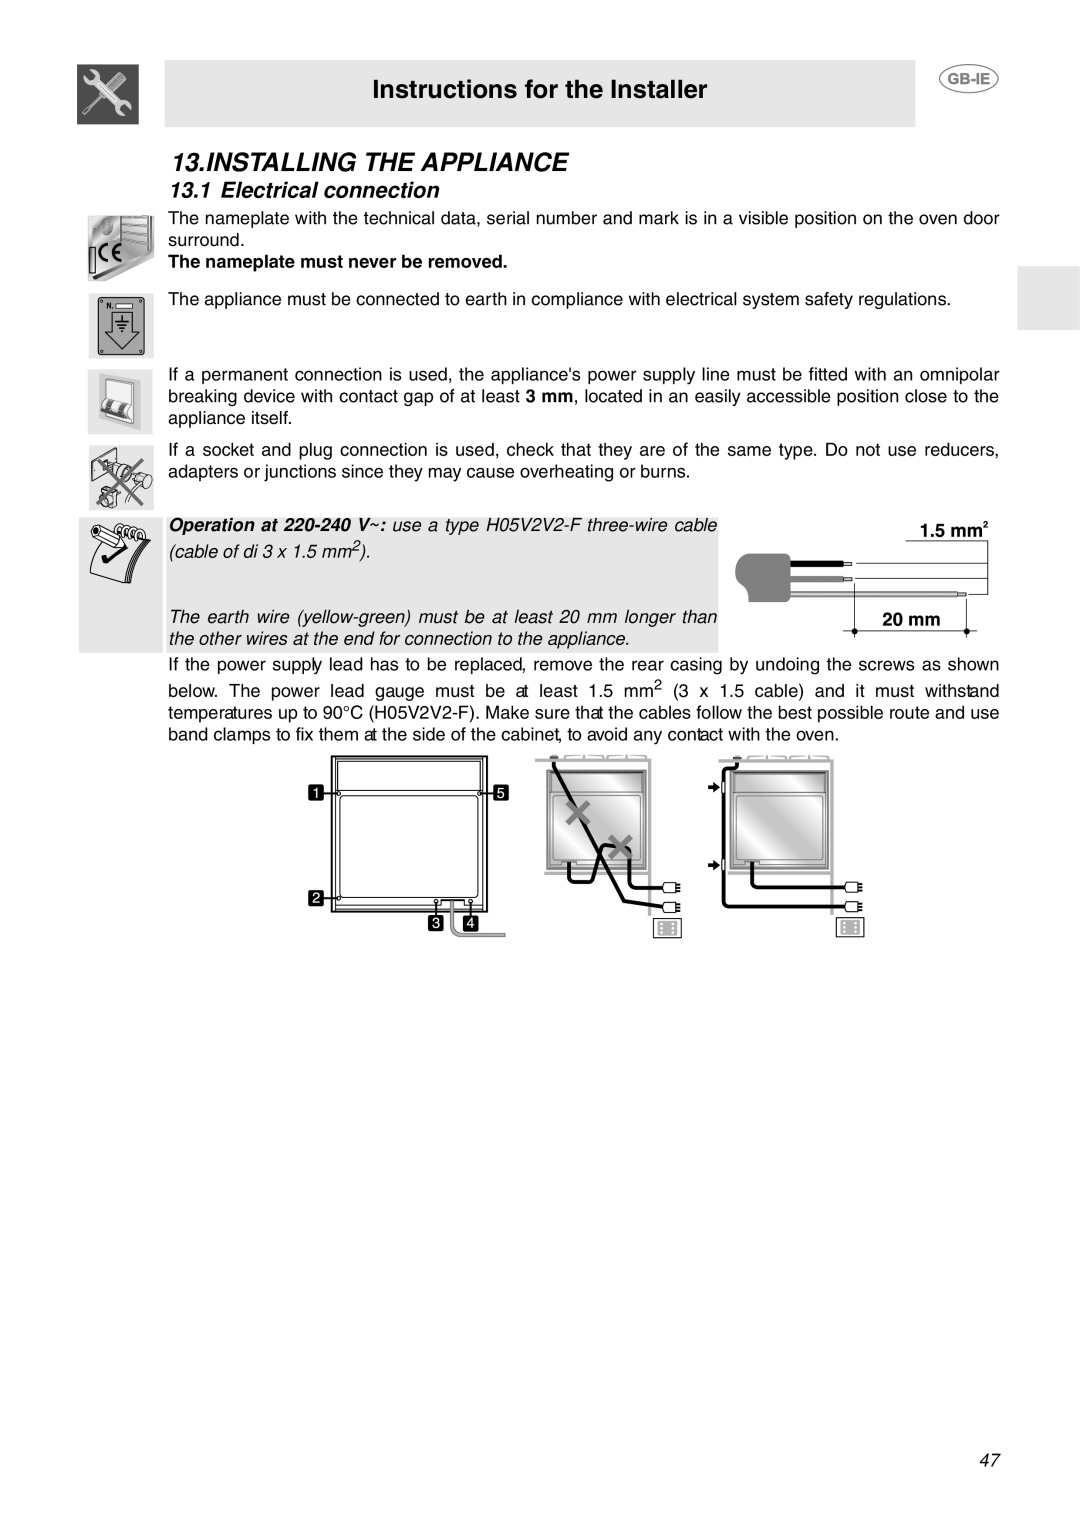 Smeg FP850APZ manual Instructions for the Installer, Installing The Appliance, Electrical connection 